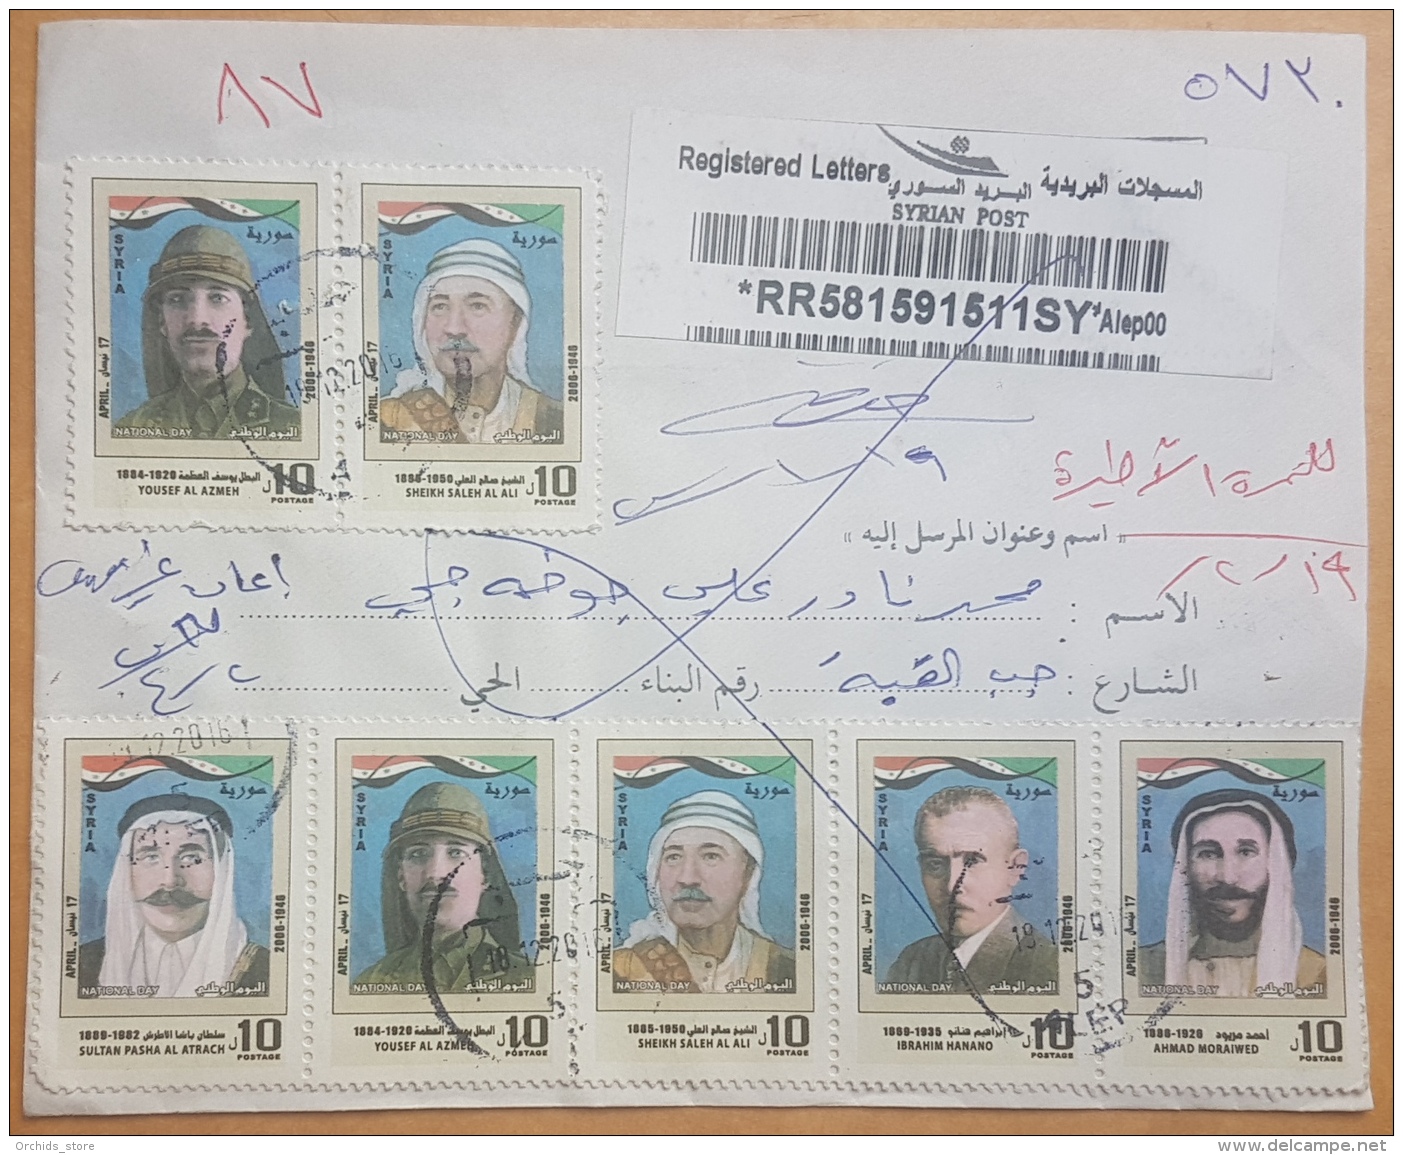 Syria 2016 CIVIL WAR Period Cover Registered ALEPPO Franked Personalities 10Lx7 + Tourism 17Lx5 - Undelivered - Syria